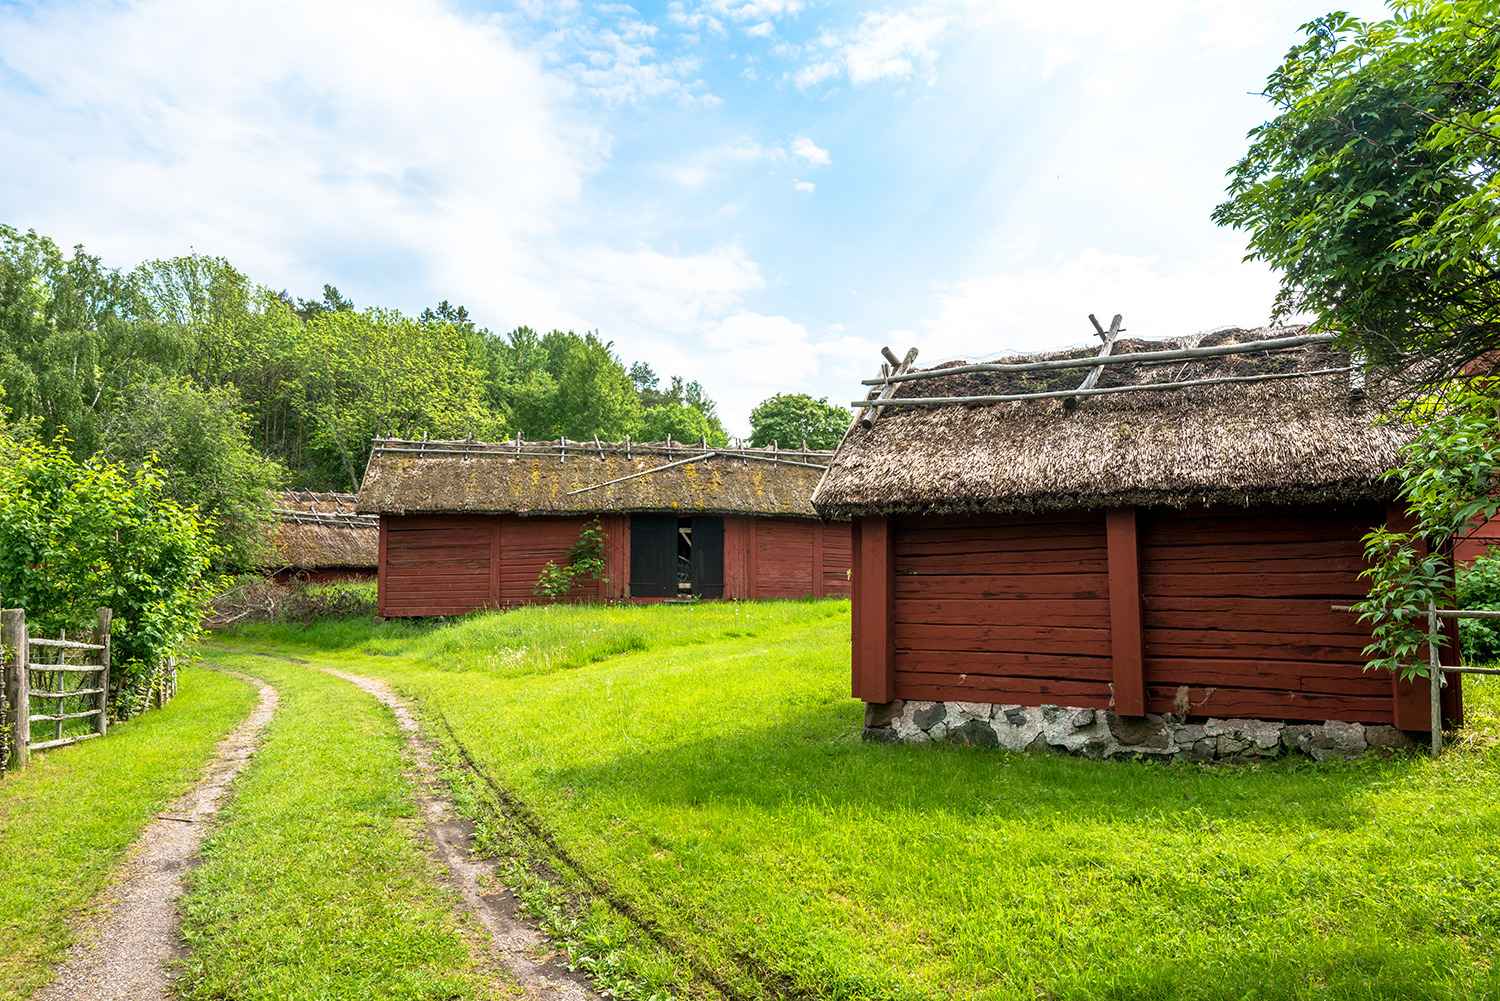 Red wooden houses with stone foundations and thatched roofs, wheel tracks in the grass, and green trees and bushes.